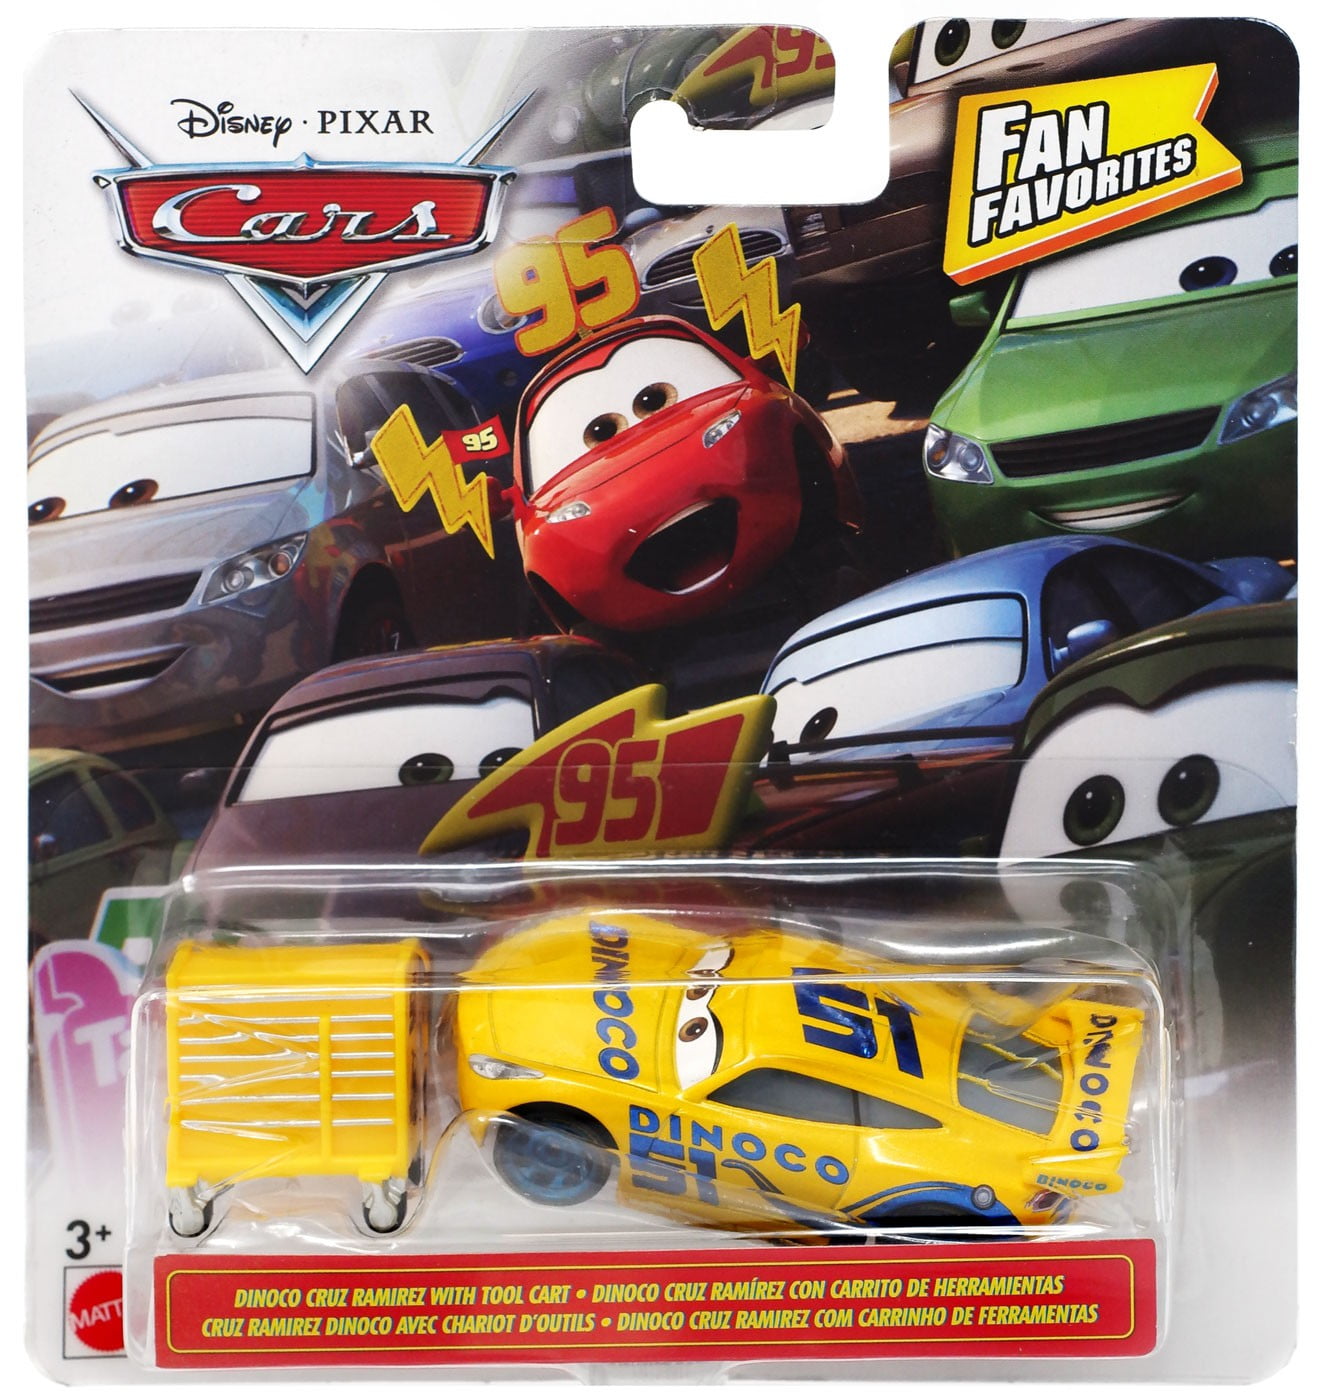 Disney Cars Dinoco Cruz Ramirez Collectible Racecar Automobile Toys Based on Cars Movies for Kids Age 3 and Older Multicolor Miniature 